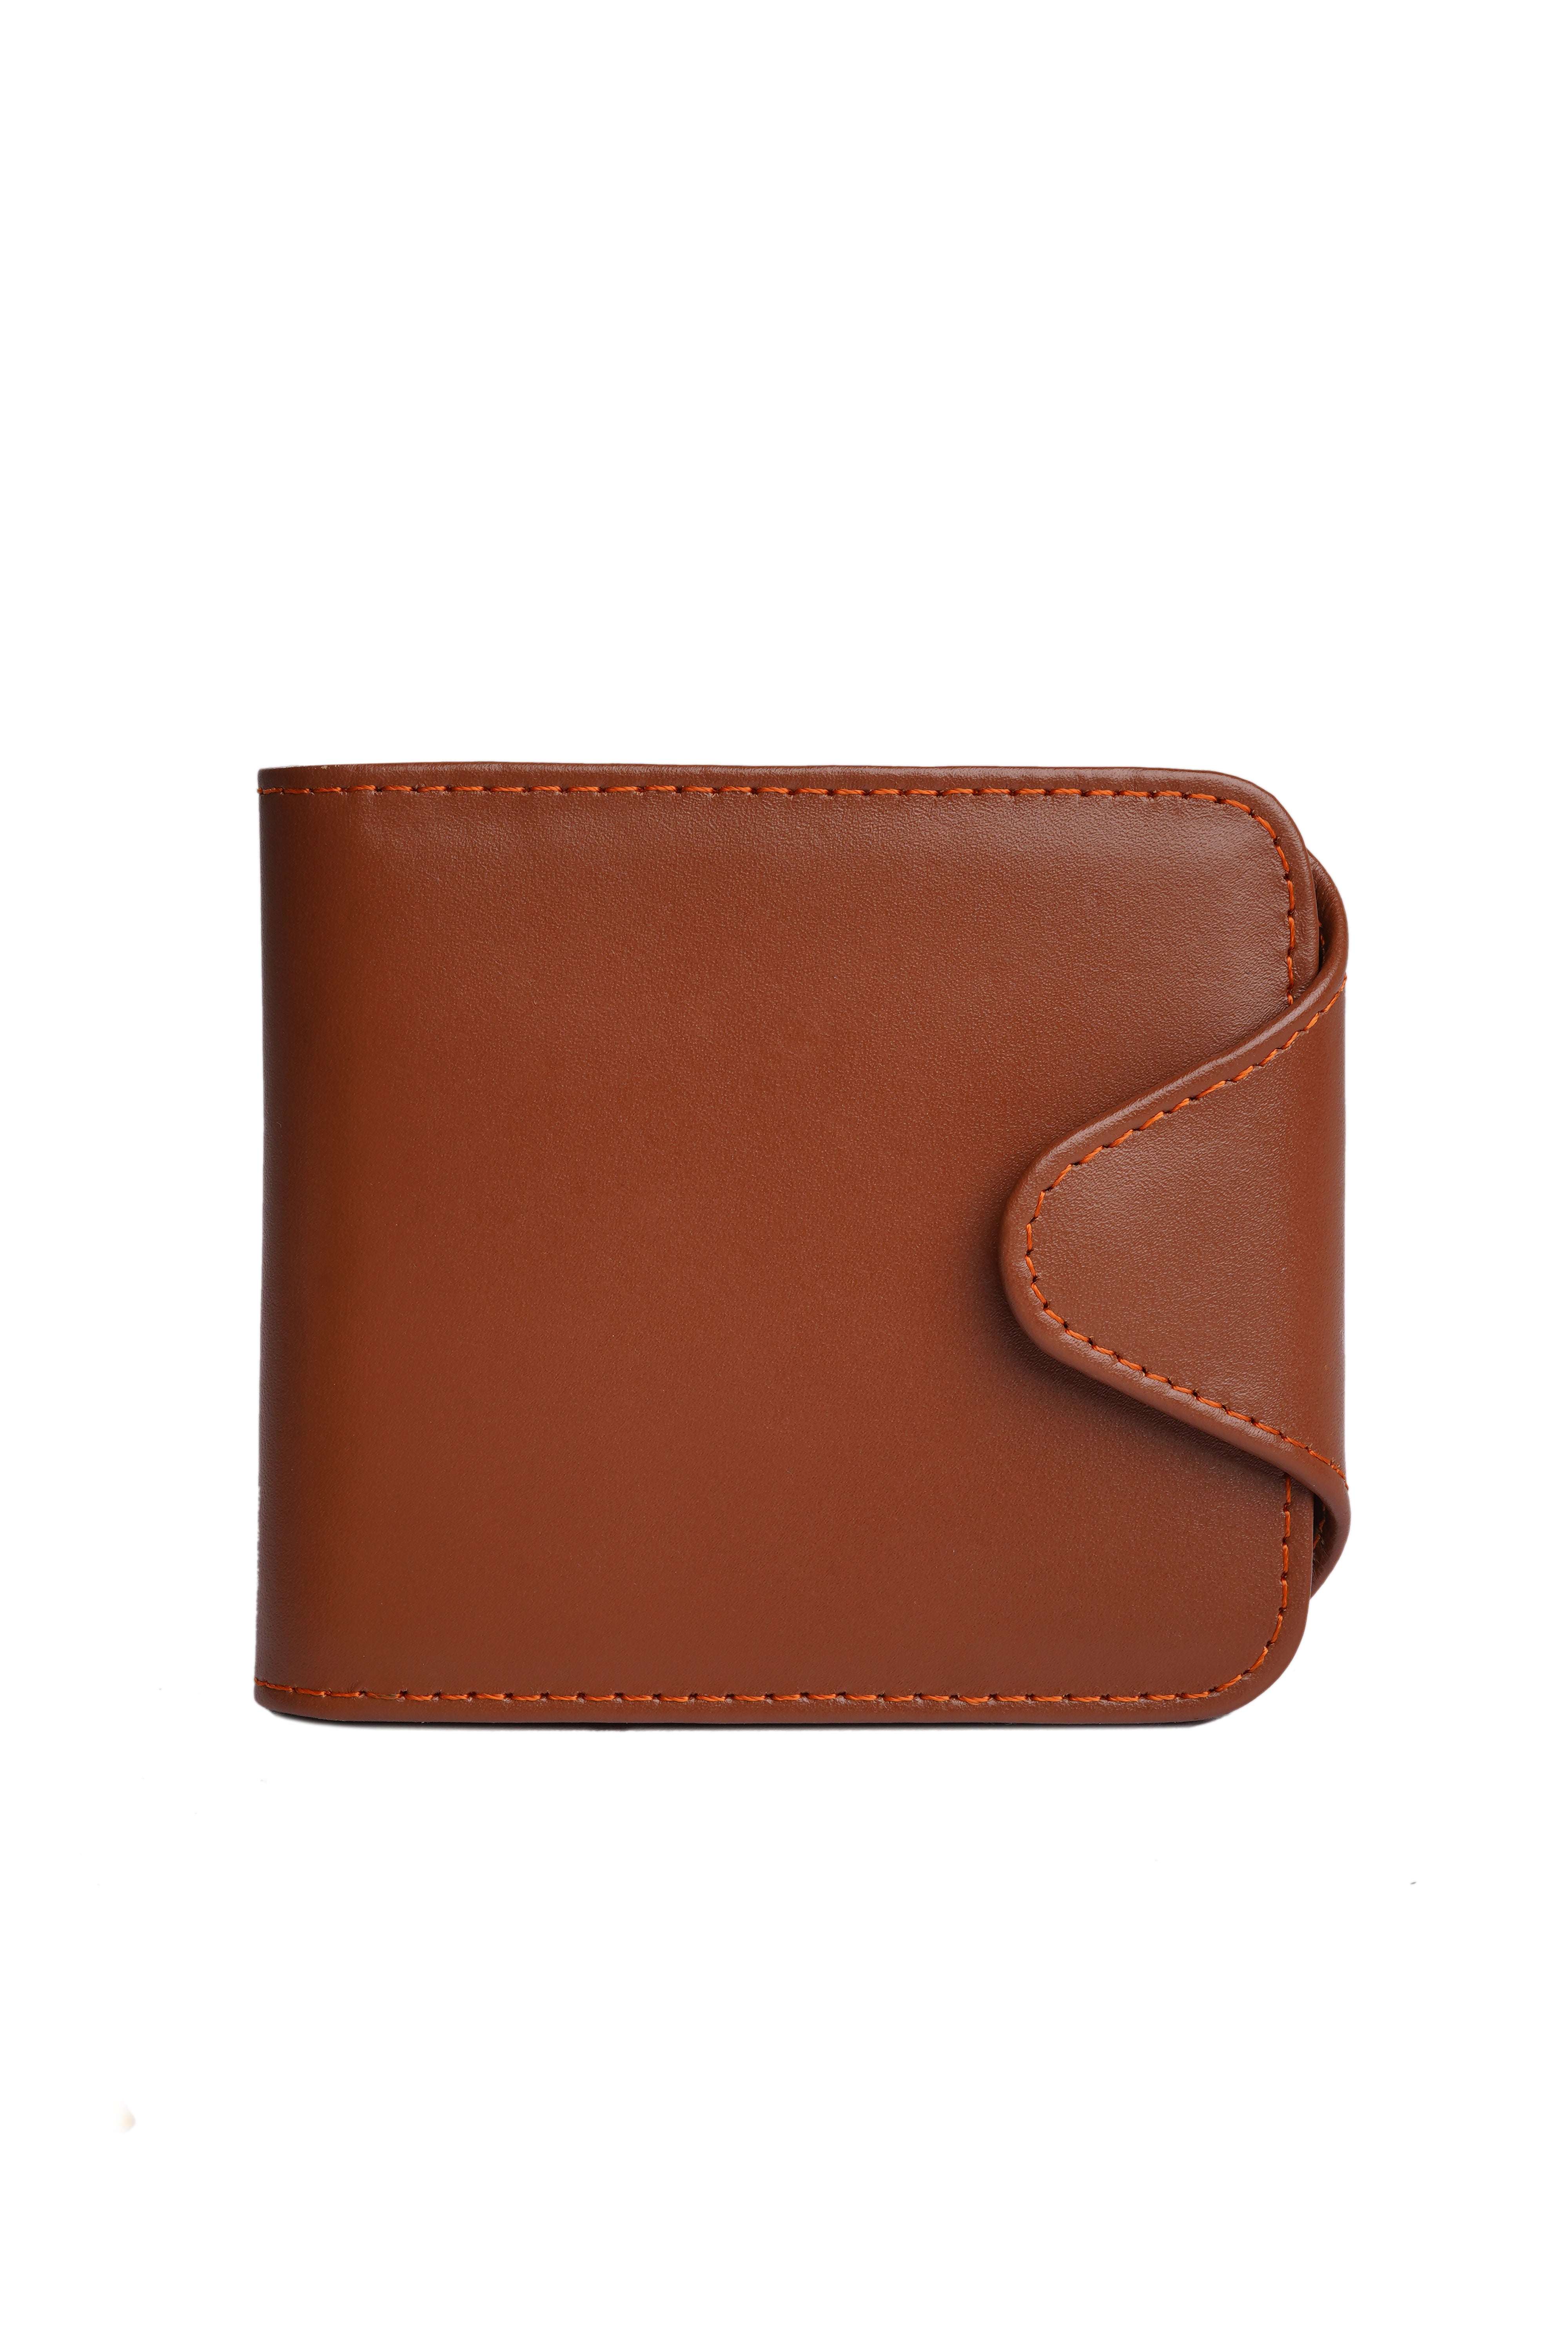 Brown Leather Gents Wallet